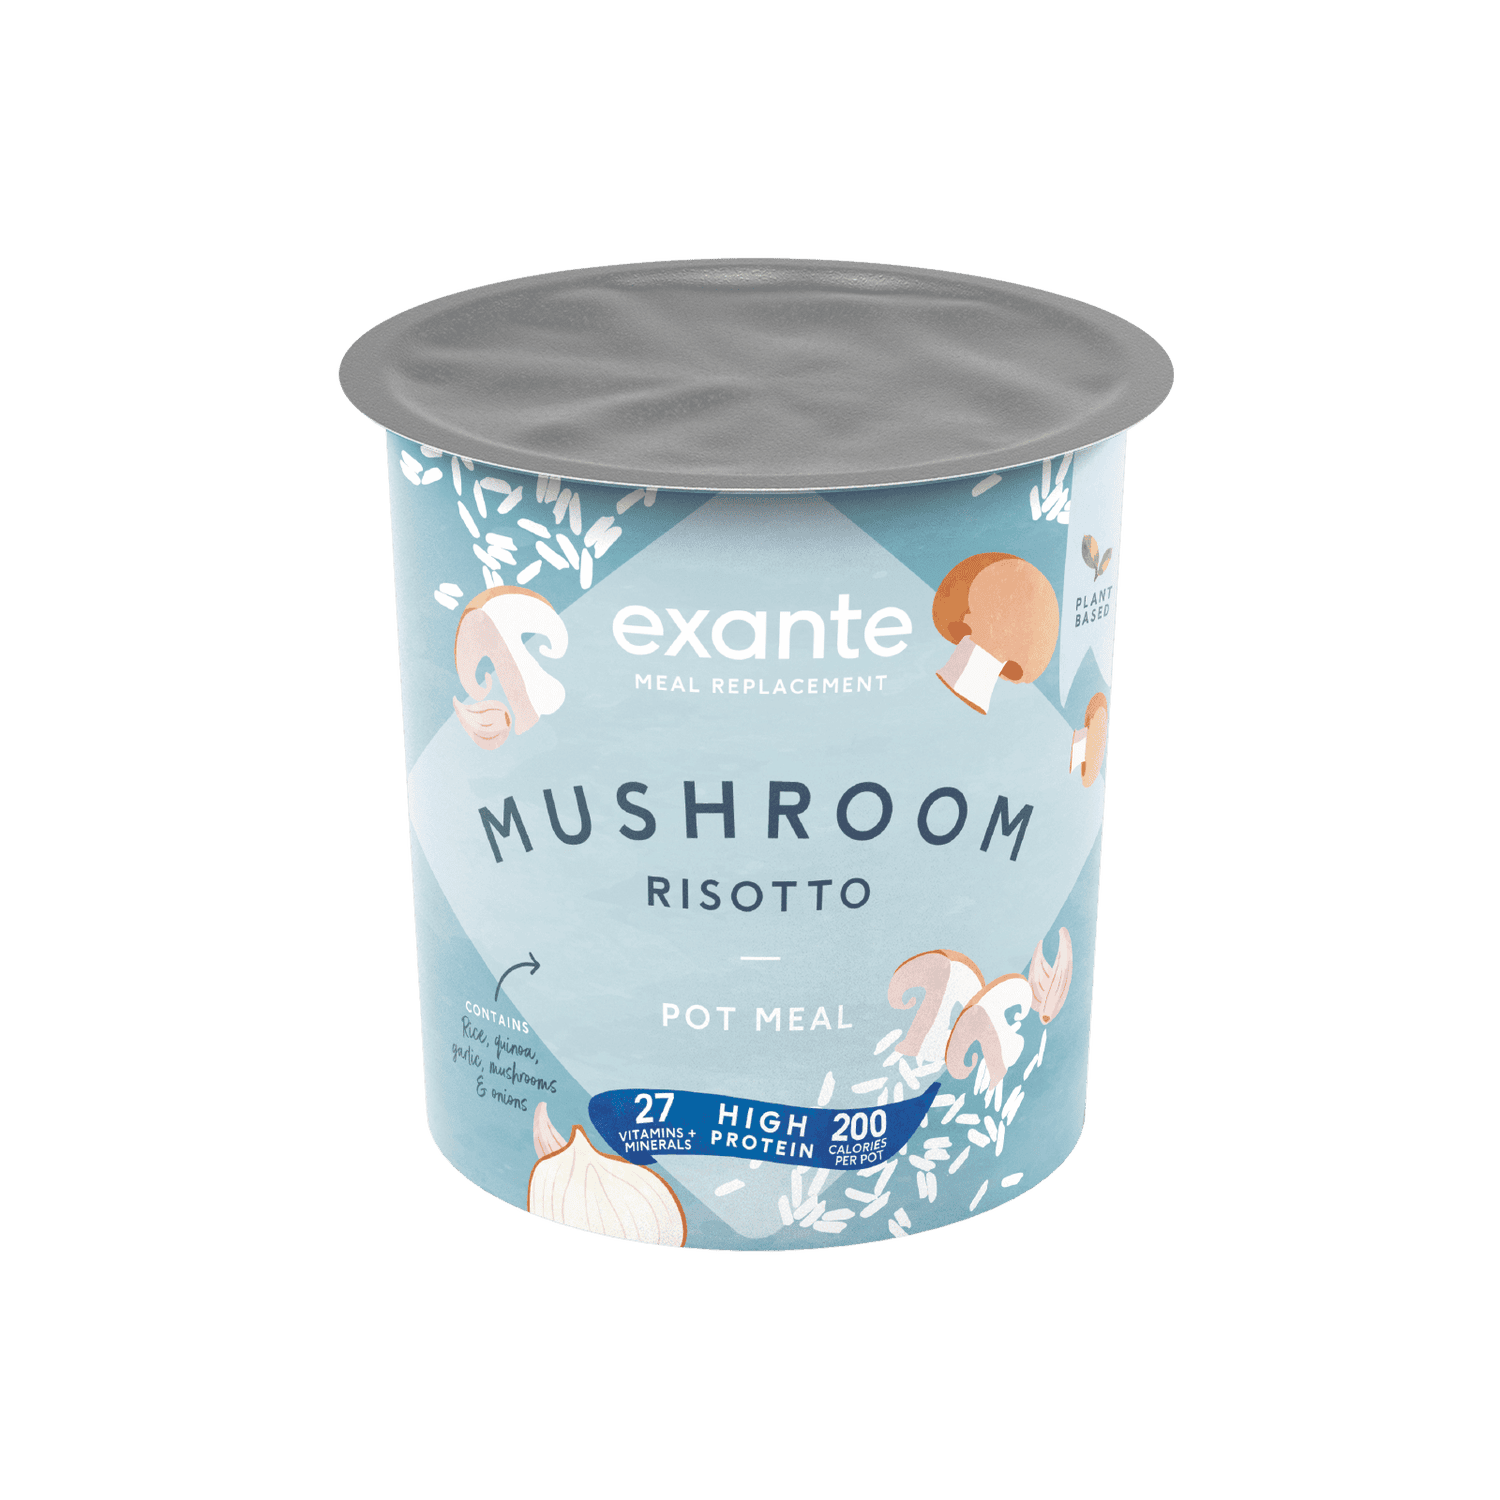 Mushroom Risotto Pot Meal - Meal Replacement